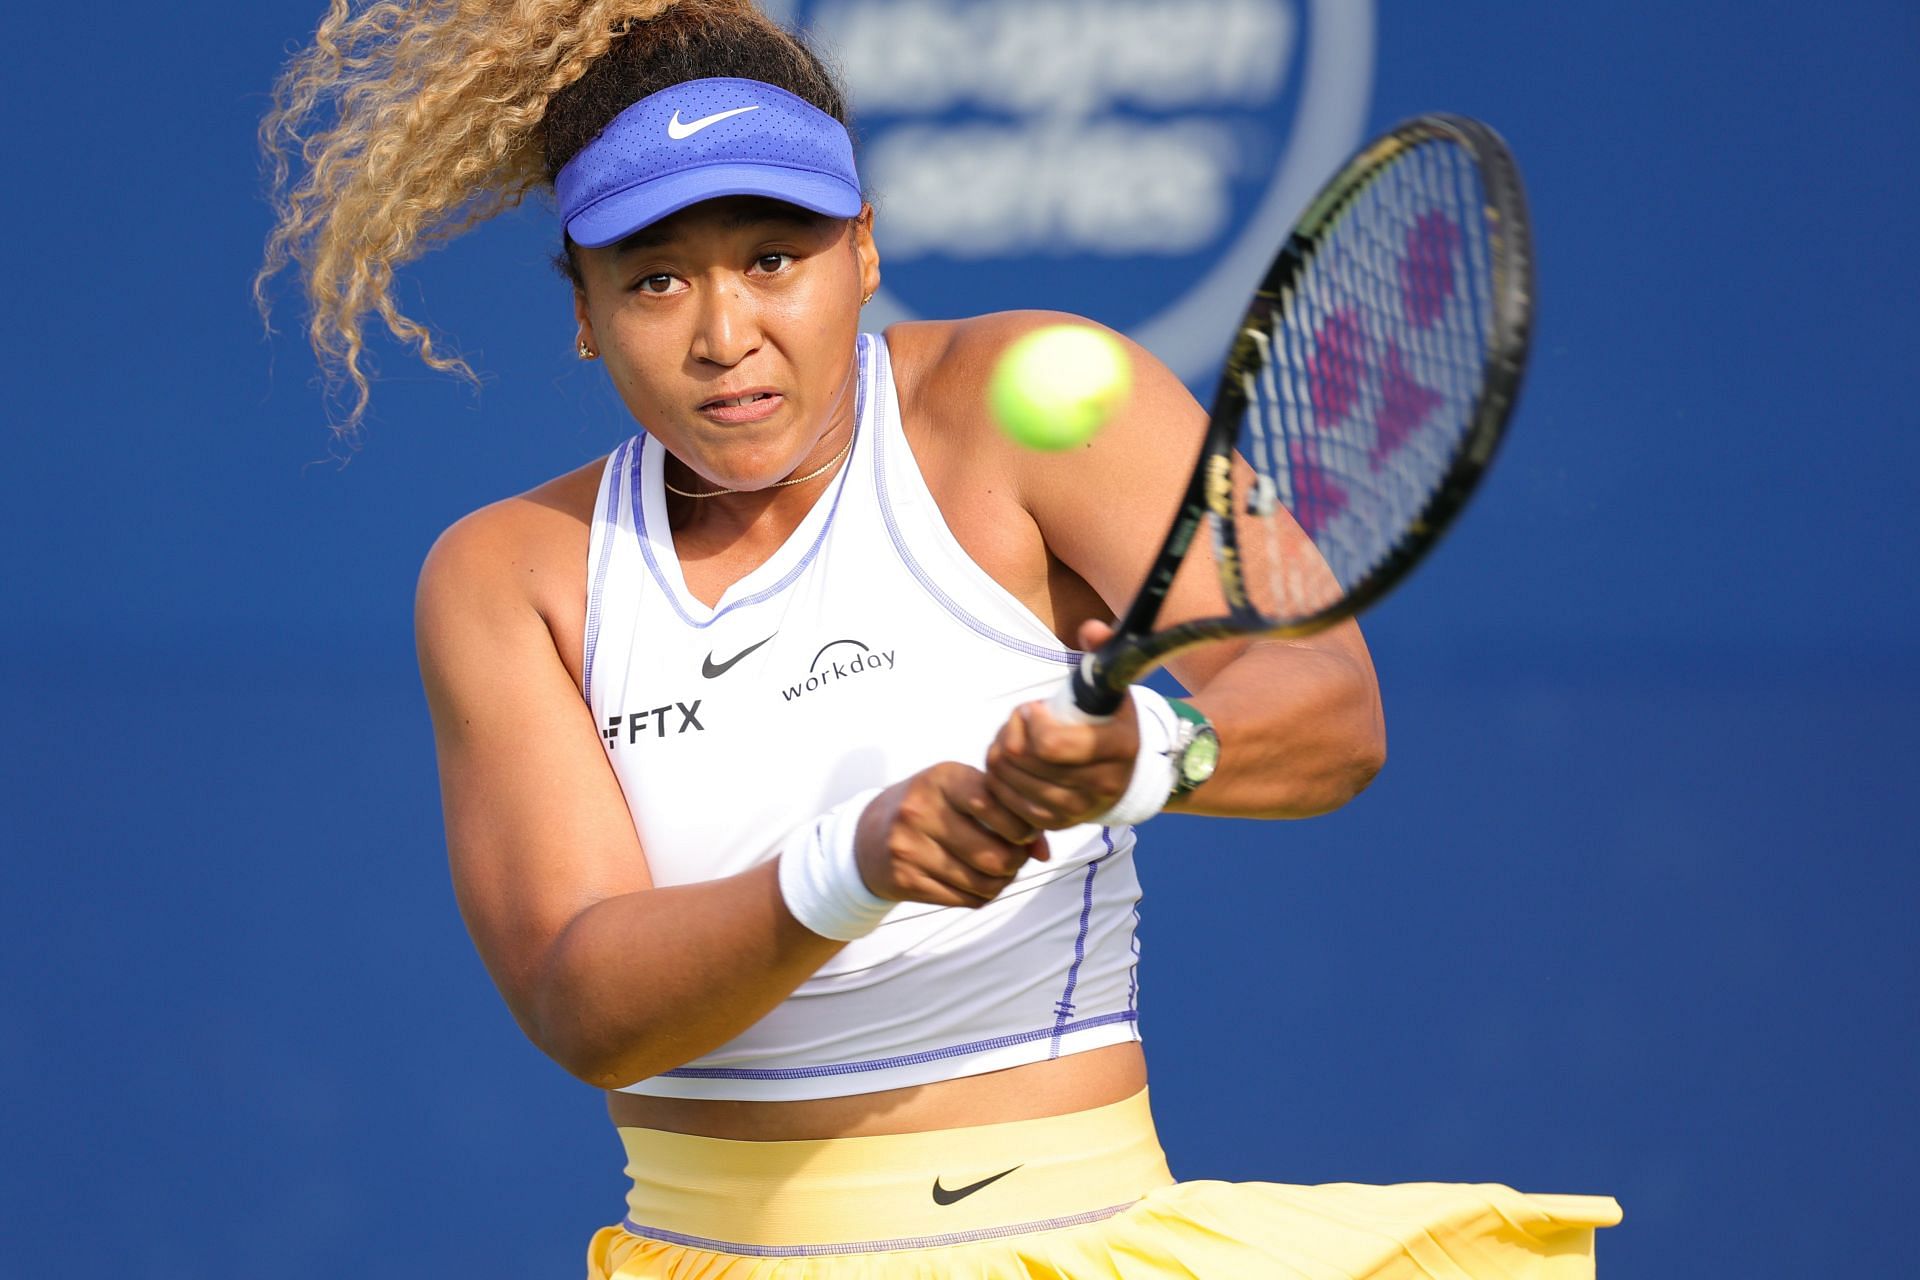 If you know you're an unsophisticated investor why would you dump millions  into anything?' - Tennis fans defend Naomi Osaka after investors sue her  following FTX bankruptcy